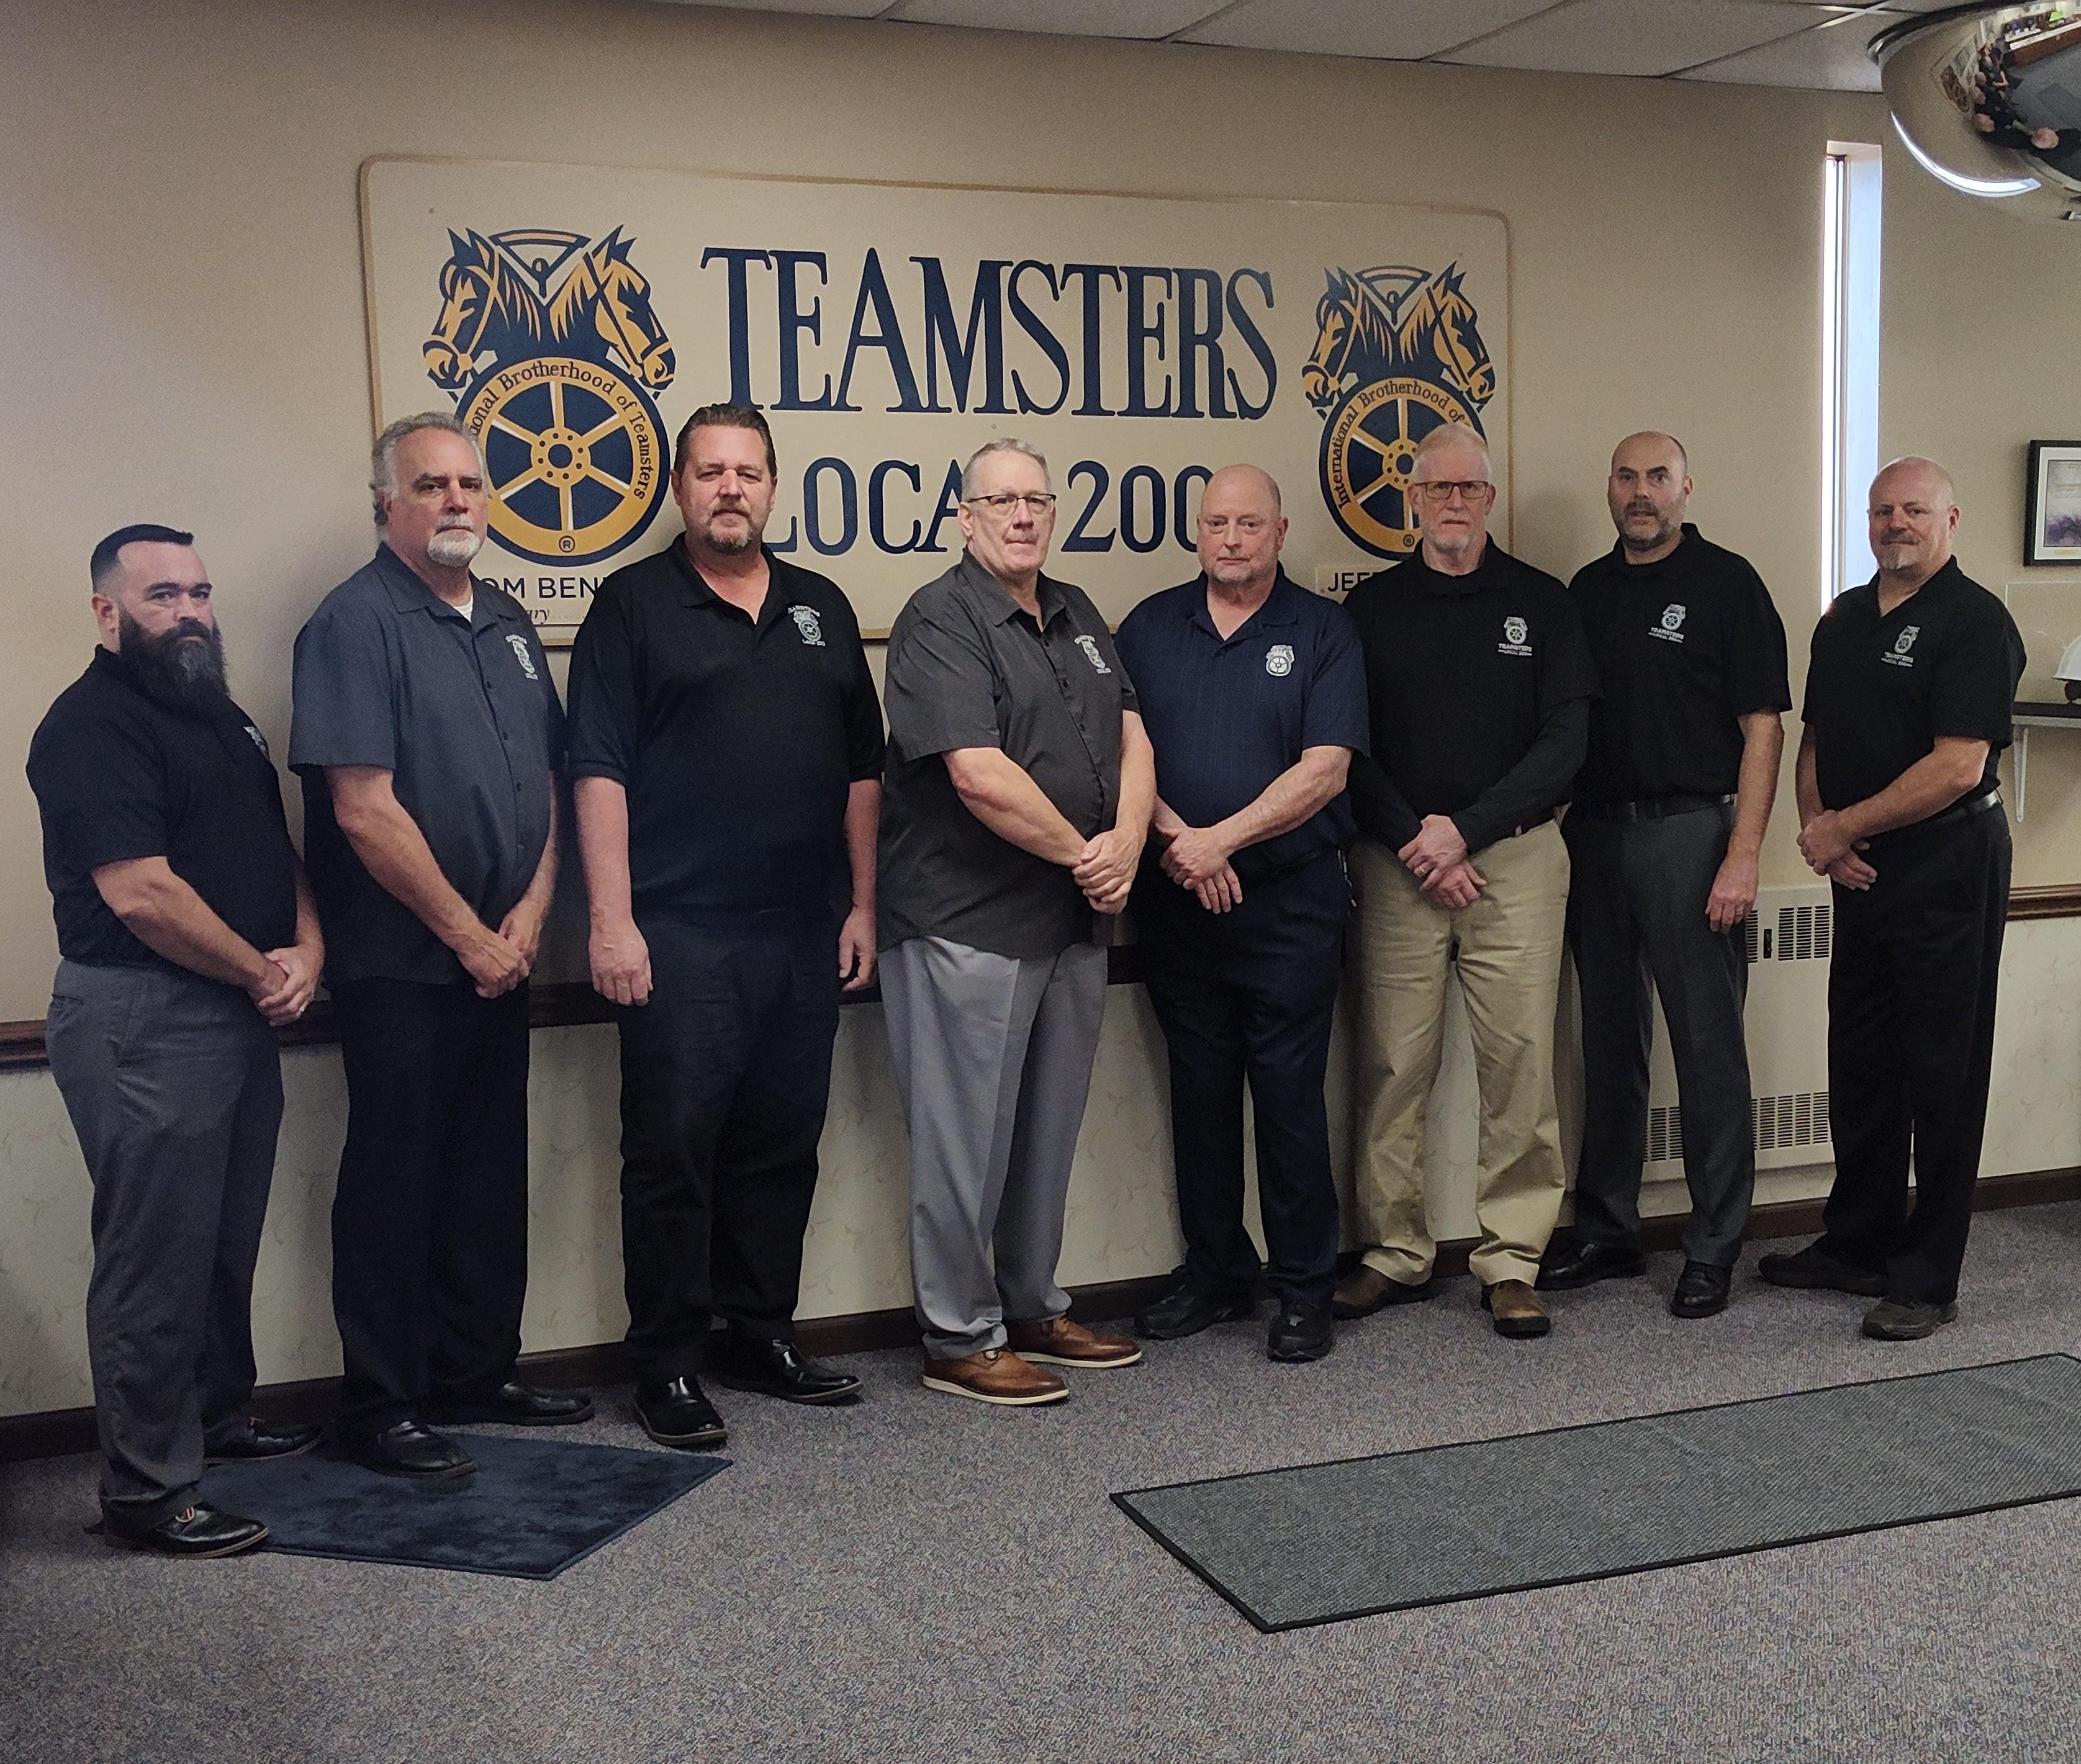 General Teamsters Local Union No. 200 wishes all its retirees, members, and families a Merry Christmas and a Happy New Year on behalf of the executive board, agents, and staff.